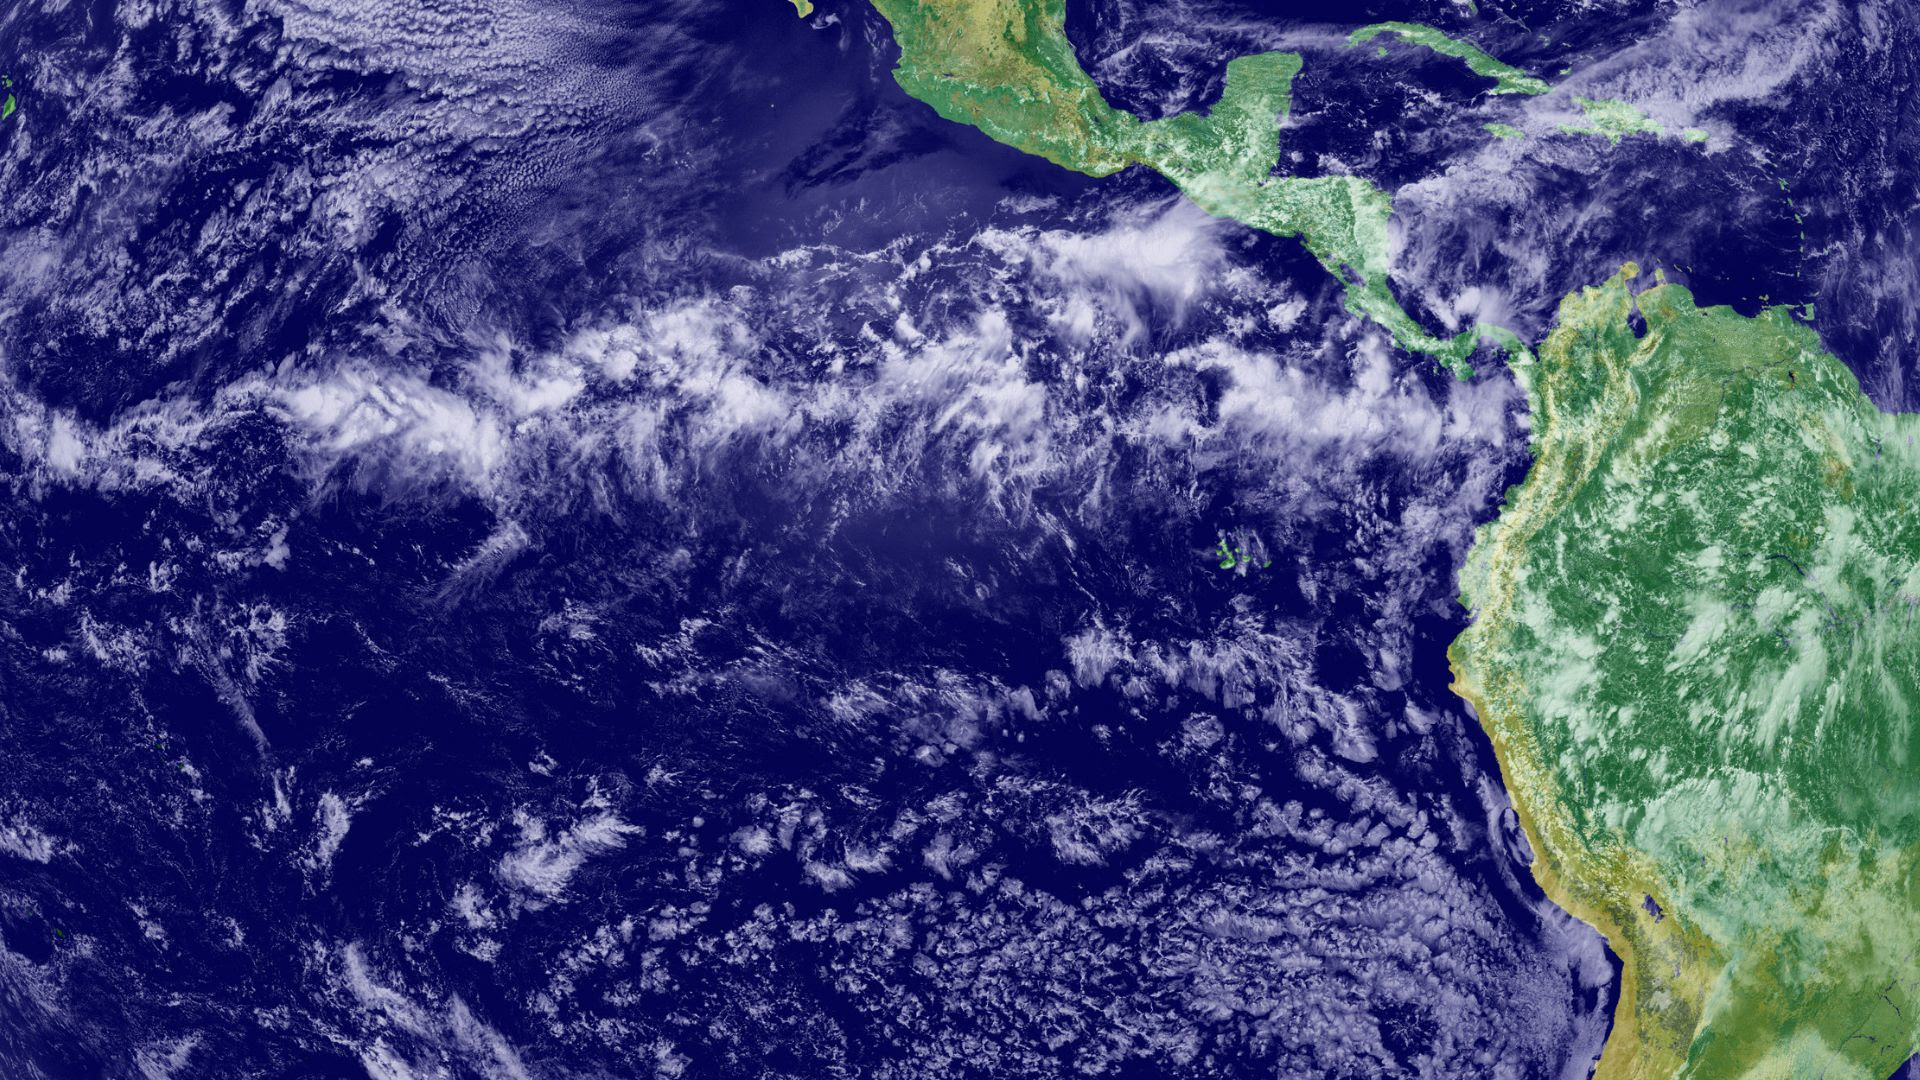 Map showing Mexico, Central America and northern South America. Near the equator, a band of thick white clouds cross the satellite image.